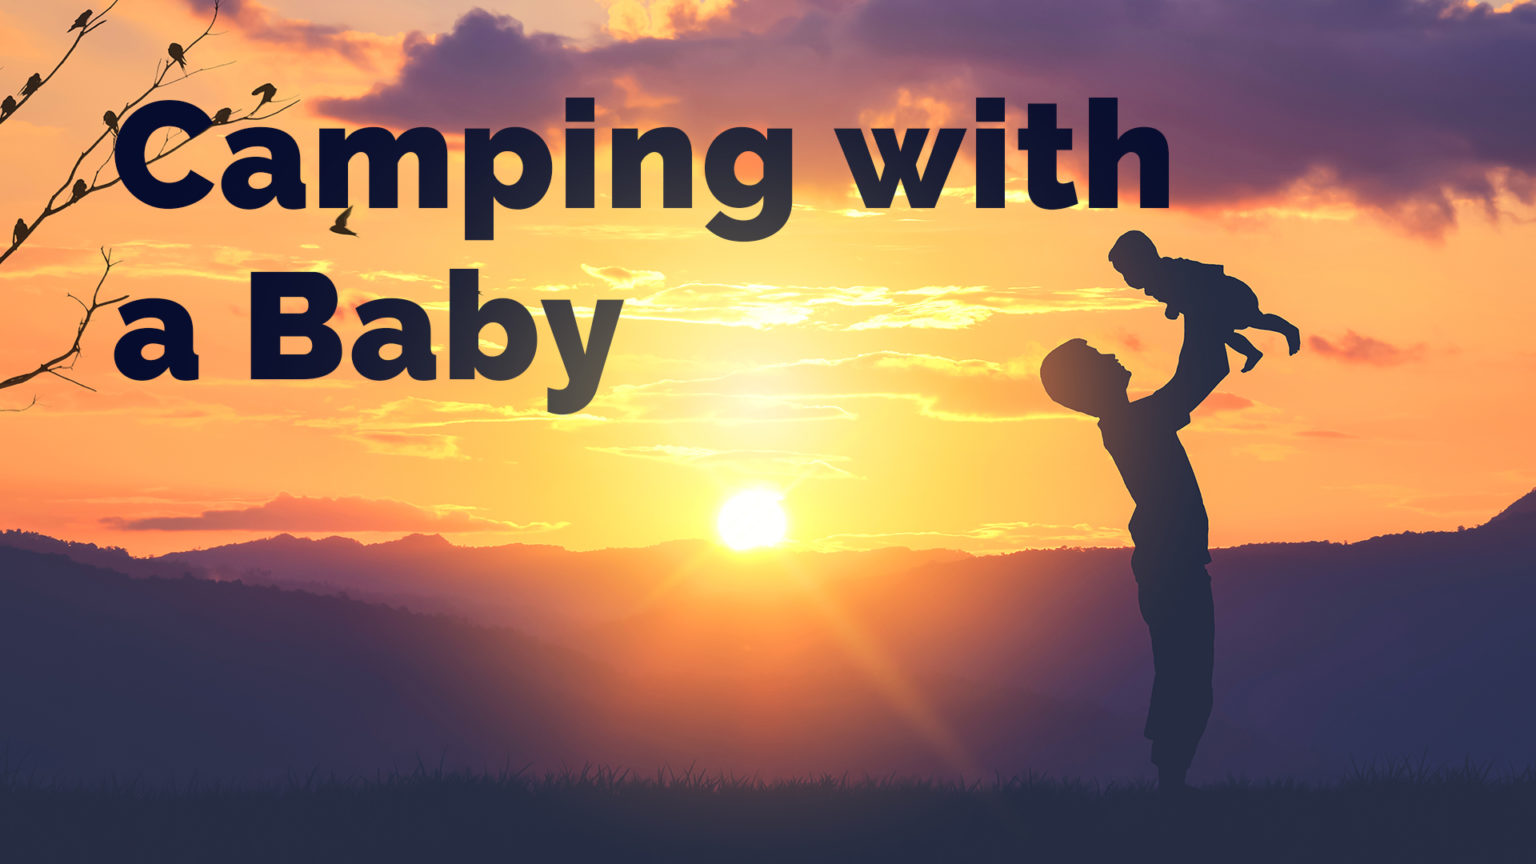 Camping With a Baby: Top Tips, Tricks and Camping Guide for New Parents